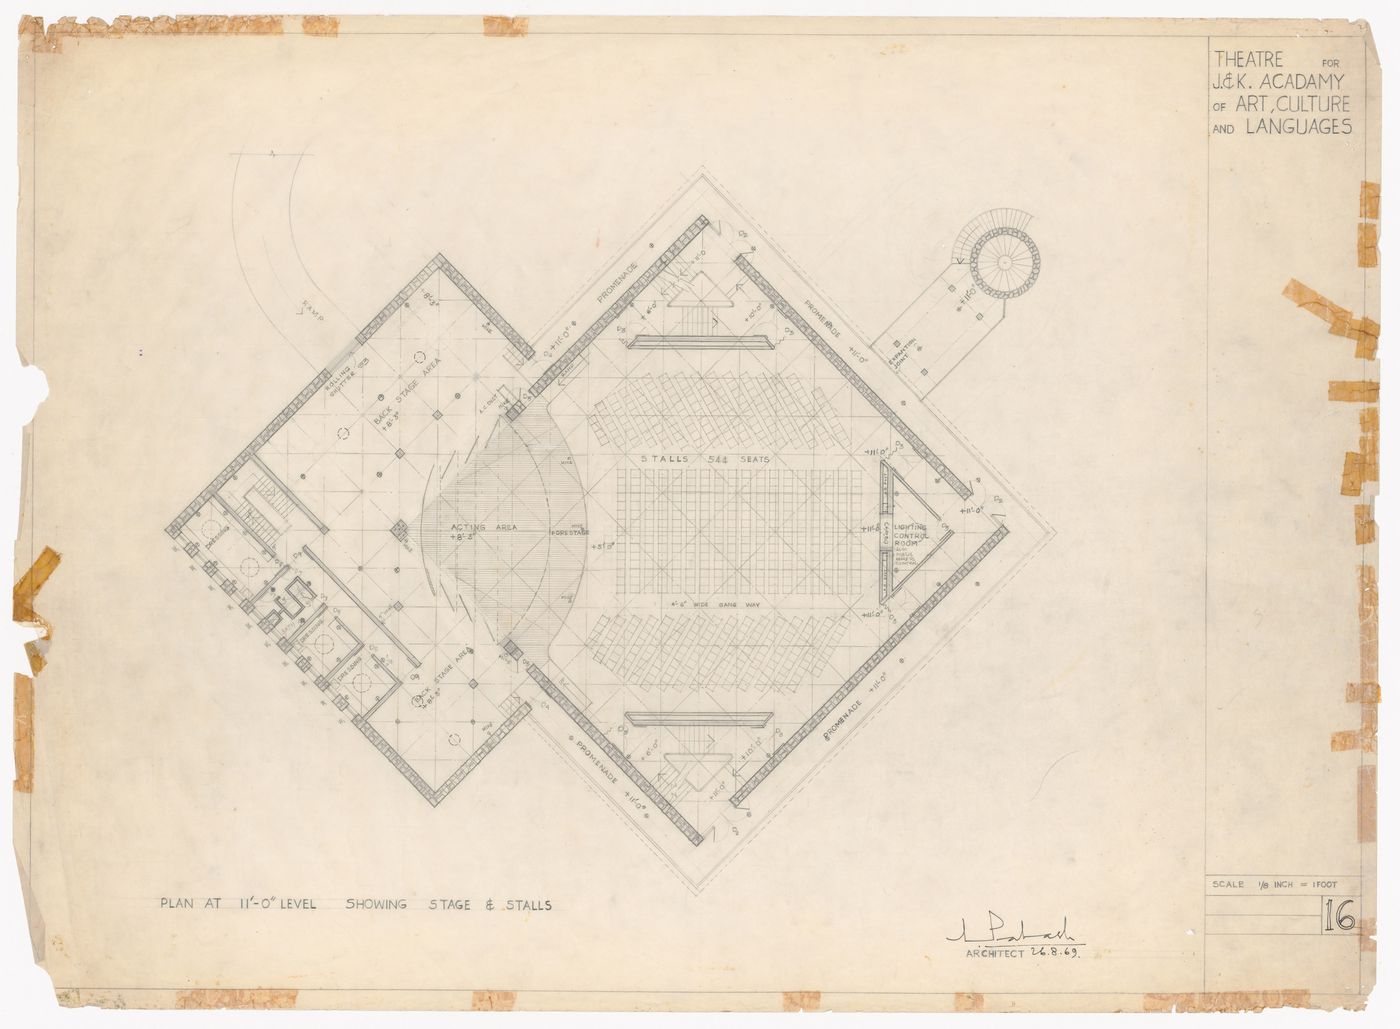 Plan showing stage and stalls for Theatre for J&K Academy of Art, Culture and Languages, Jammu, India